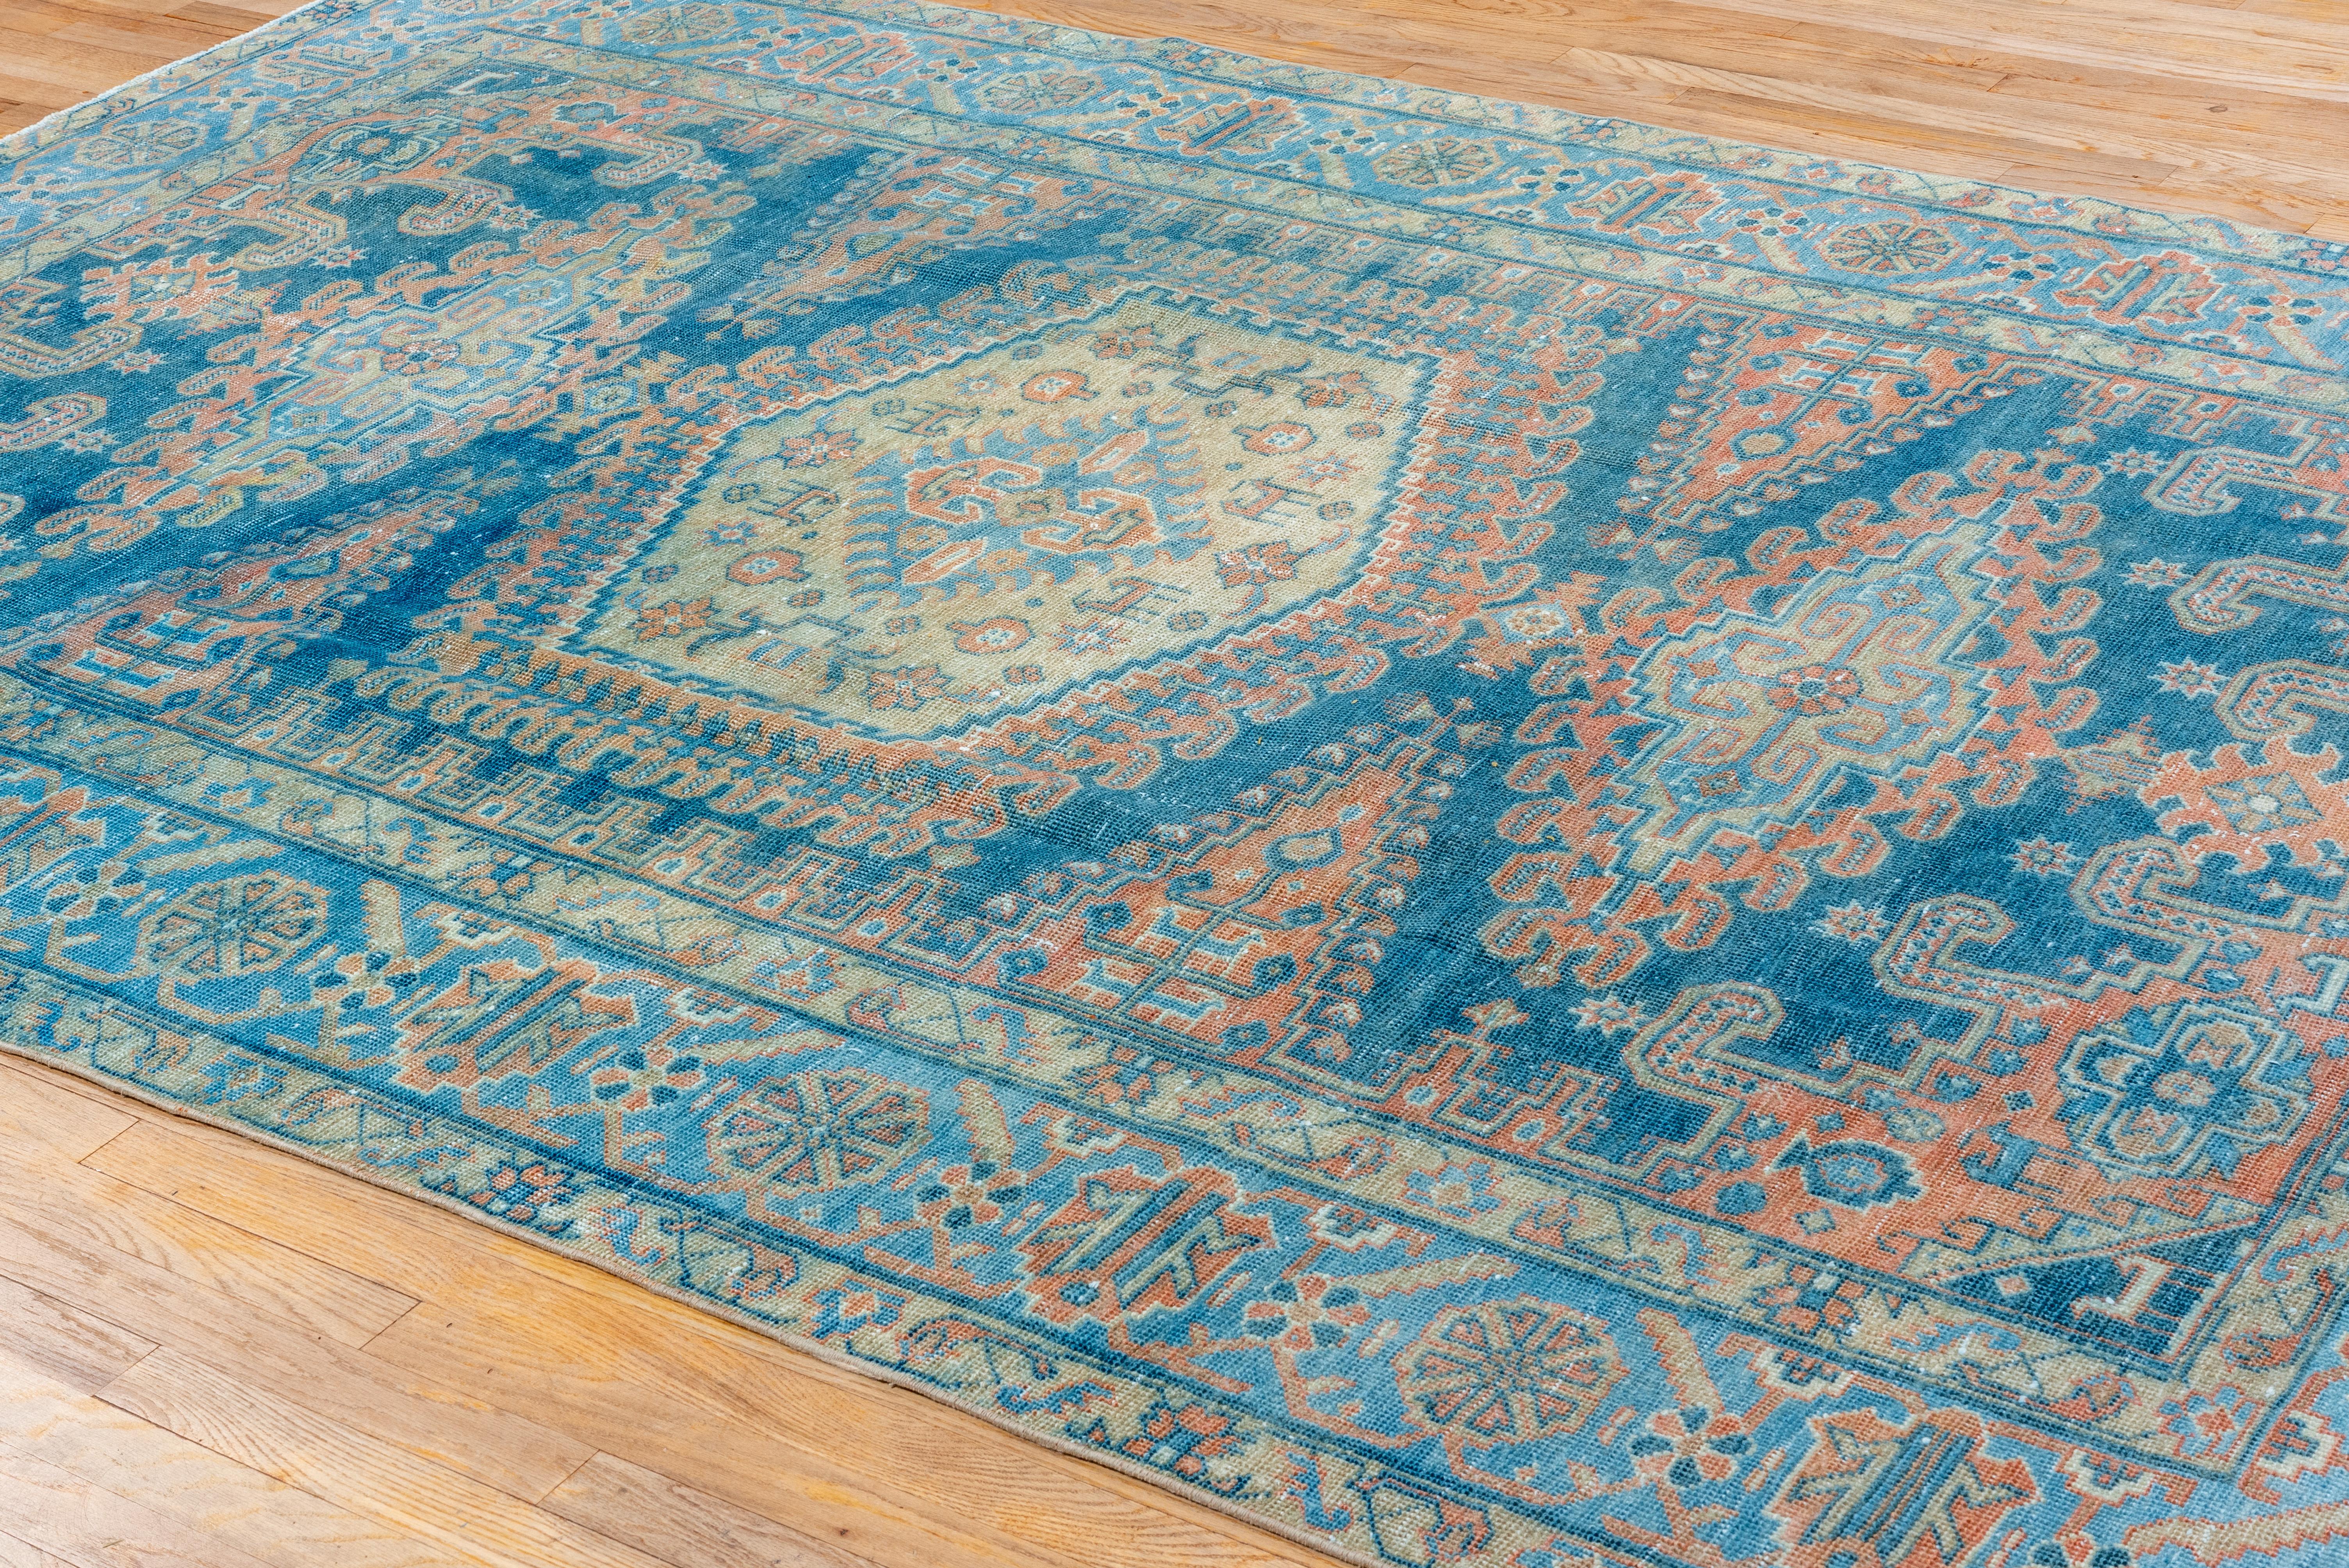 Tribal Mid 20th Century , Beautiful Antique Persian Veece Carpet, Blue and Salmon Tones For Sale